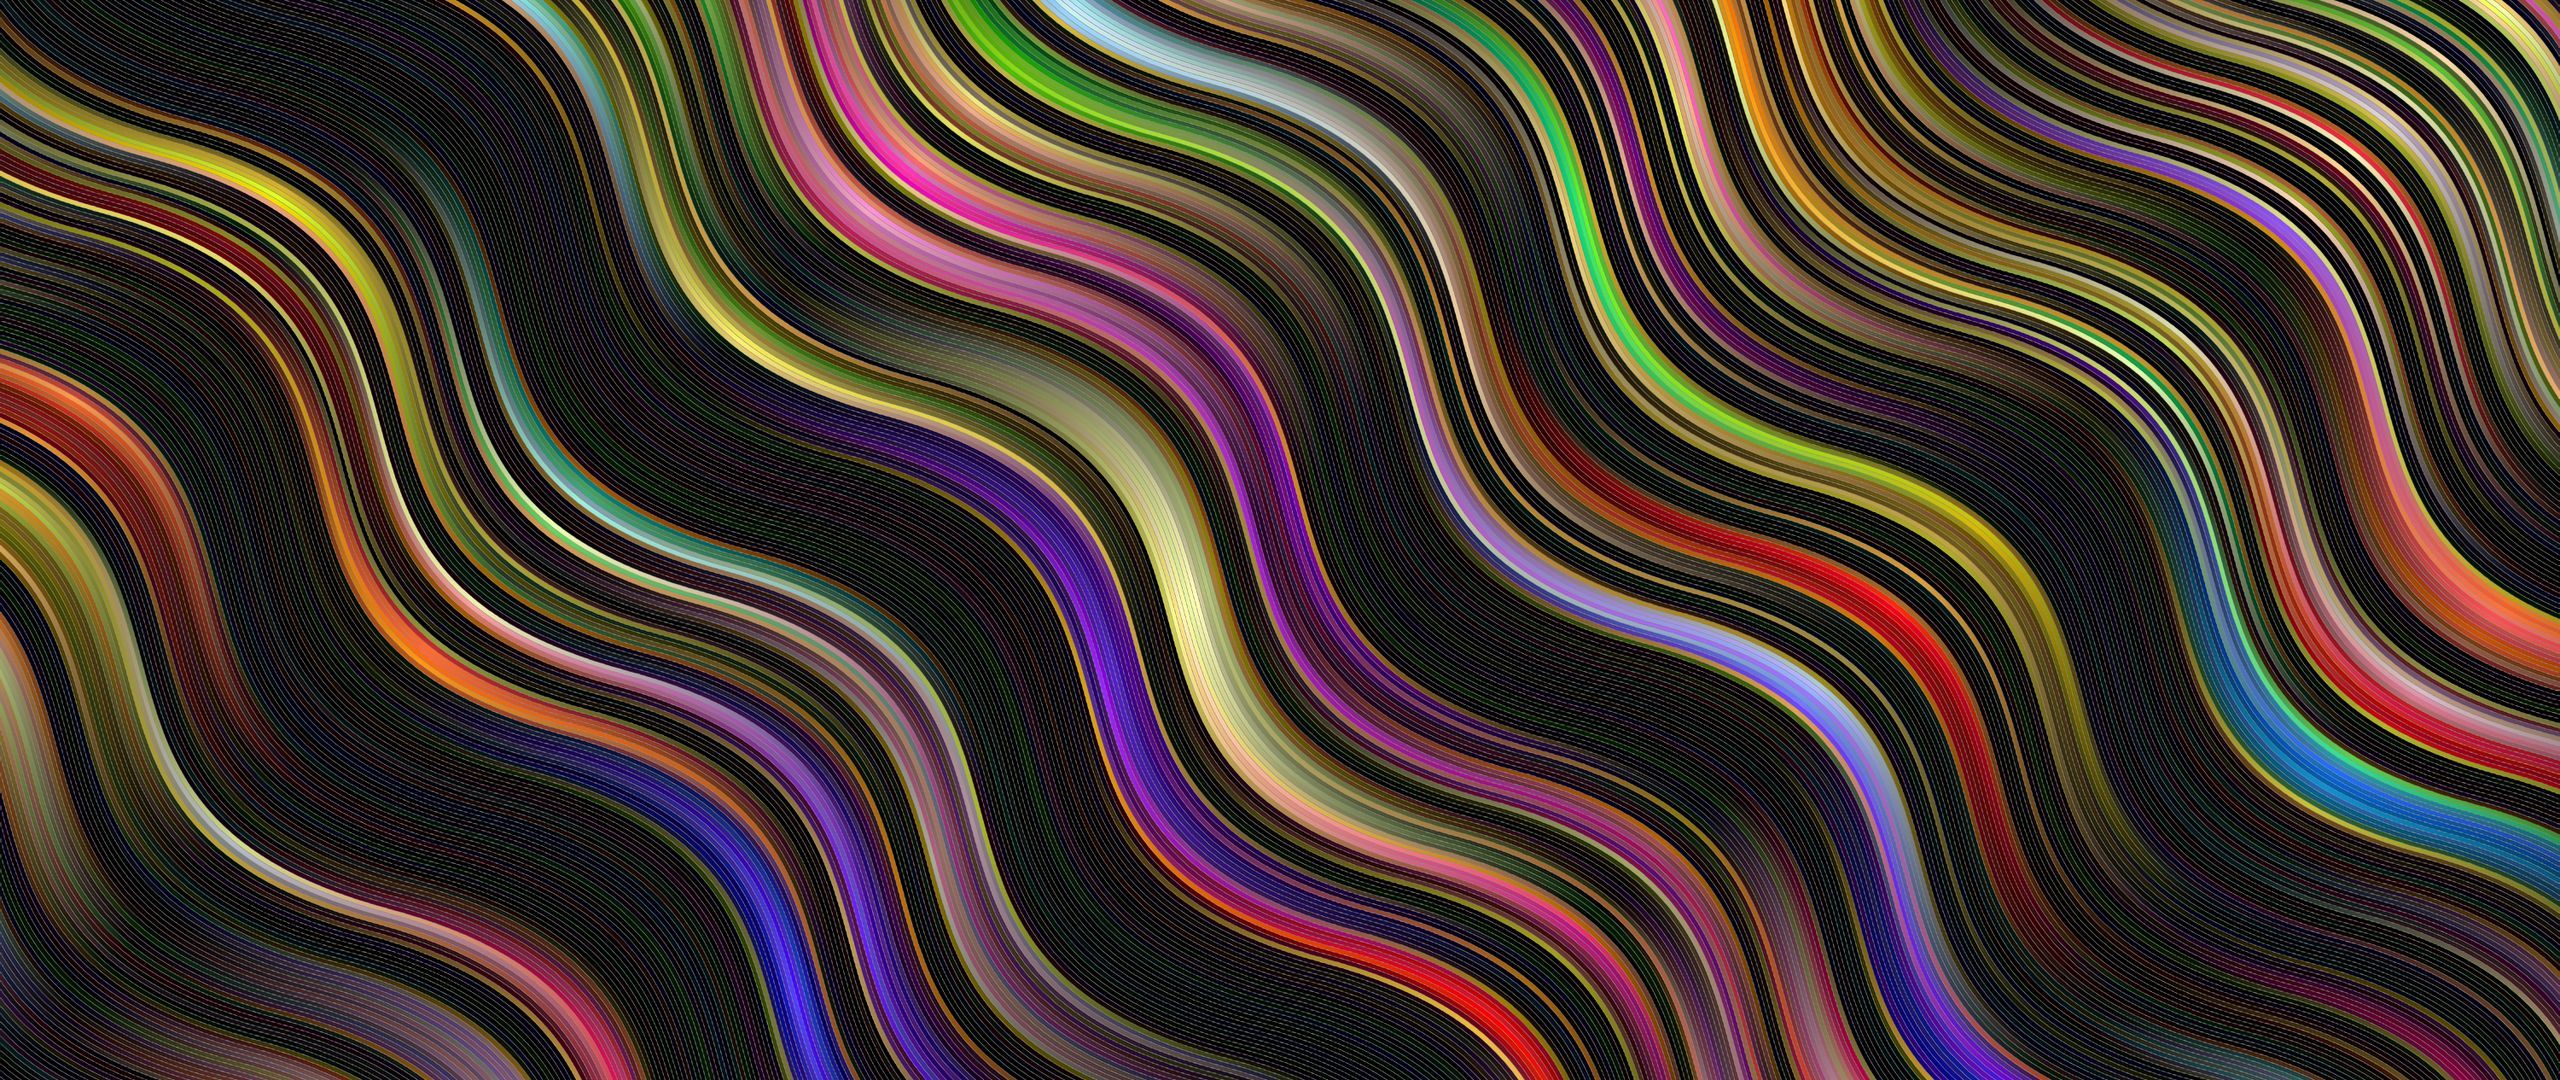 Download wallpaper 2560x1080 wavy, lines, illusion, prismatic dual wide 1080p HD background